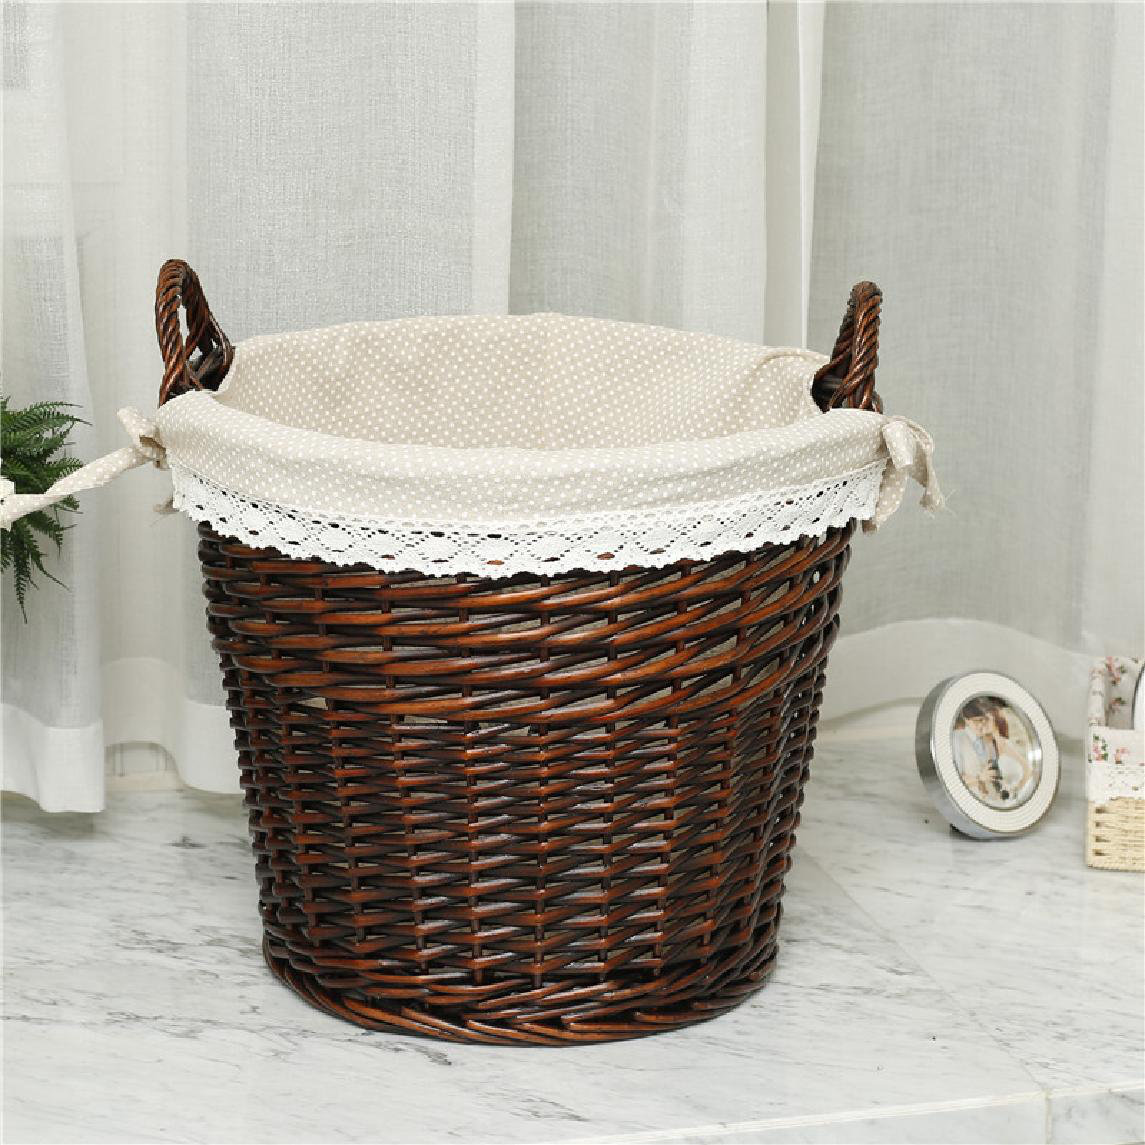 Umber Rea Wall-Hanging Collapsible Laundry Basket